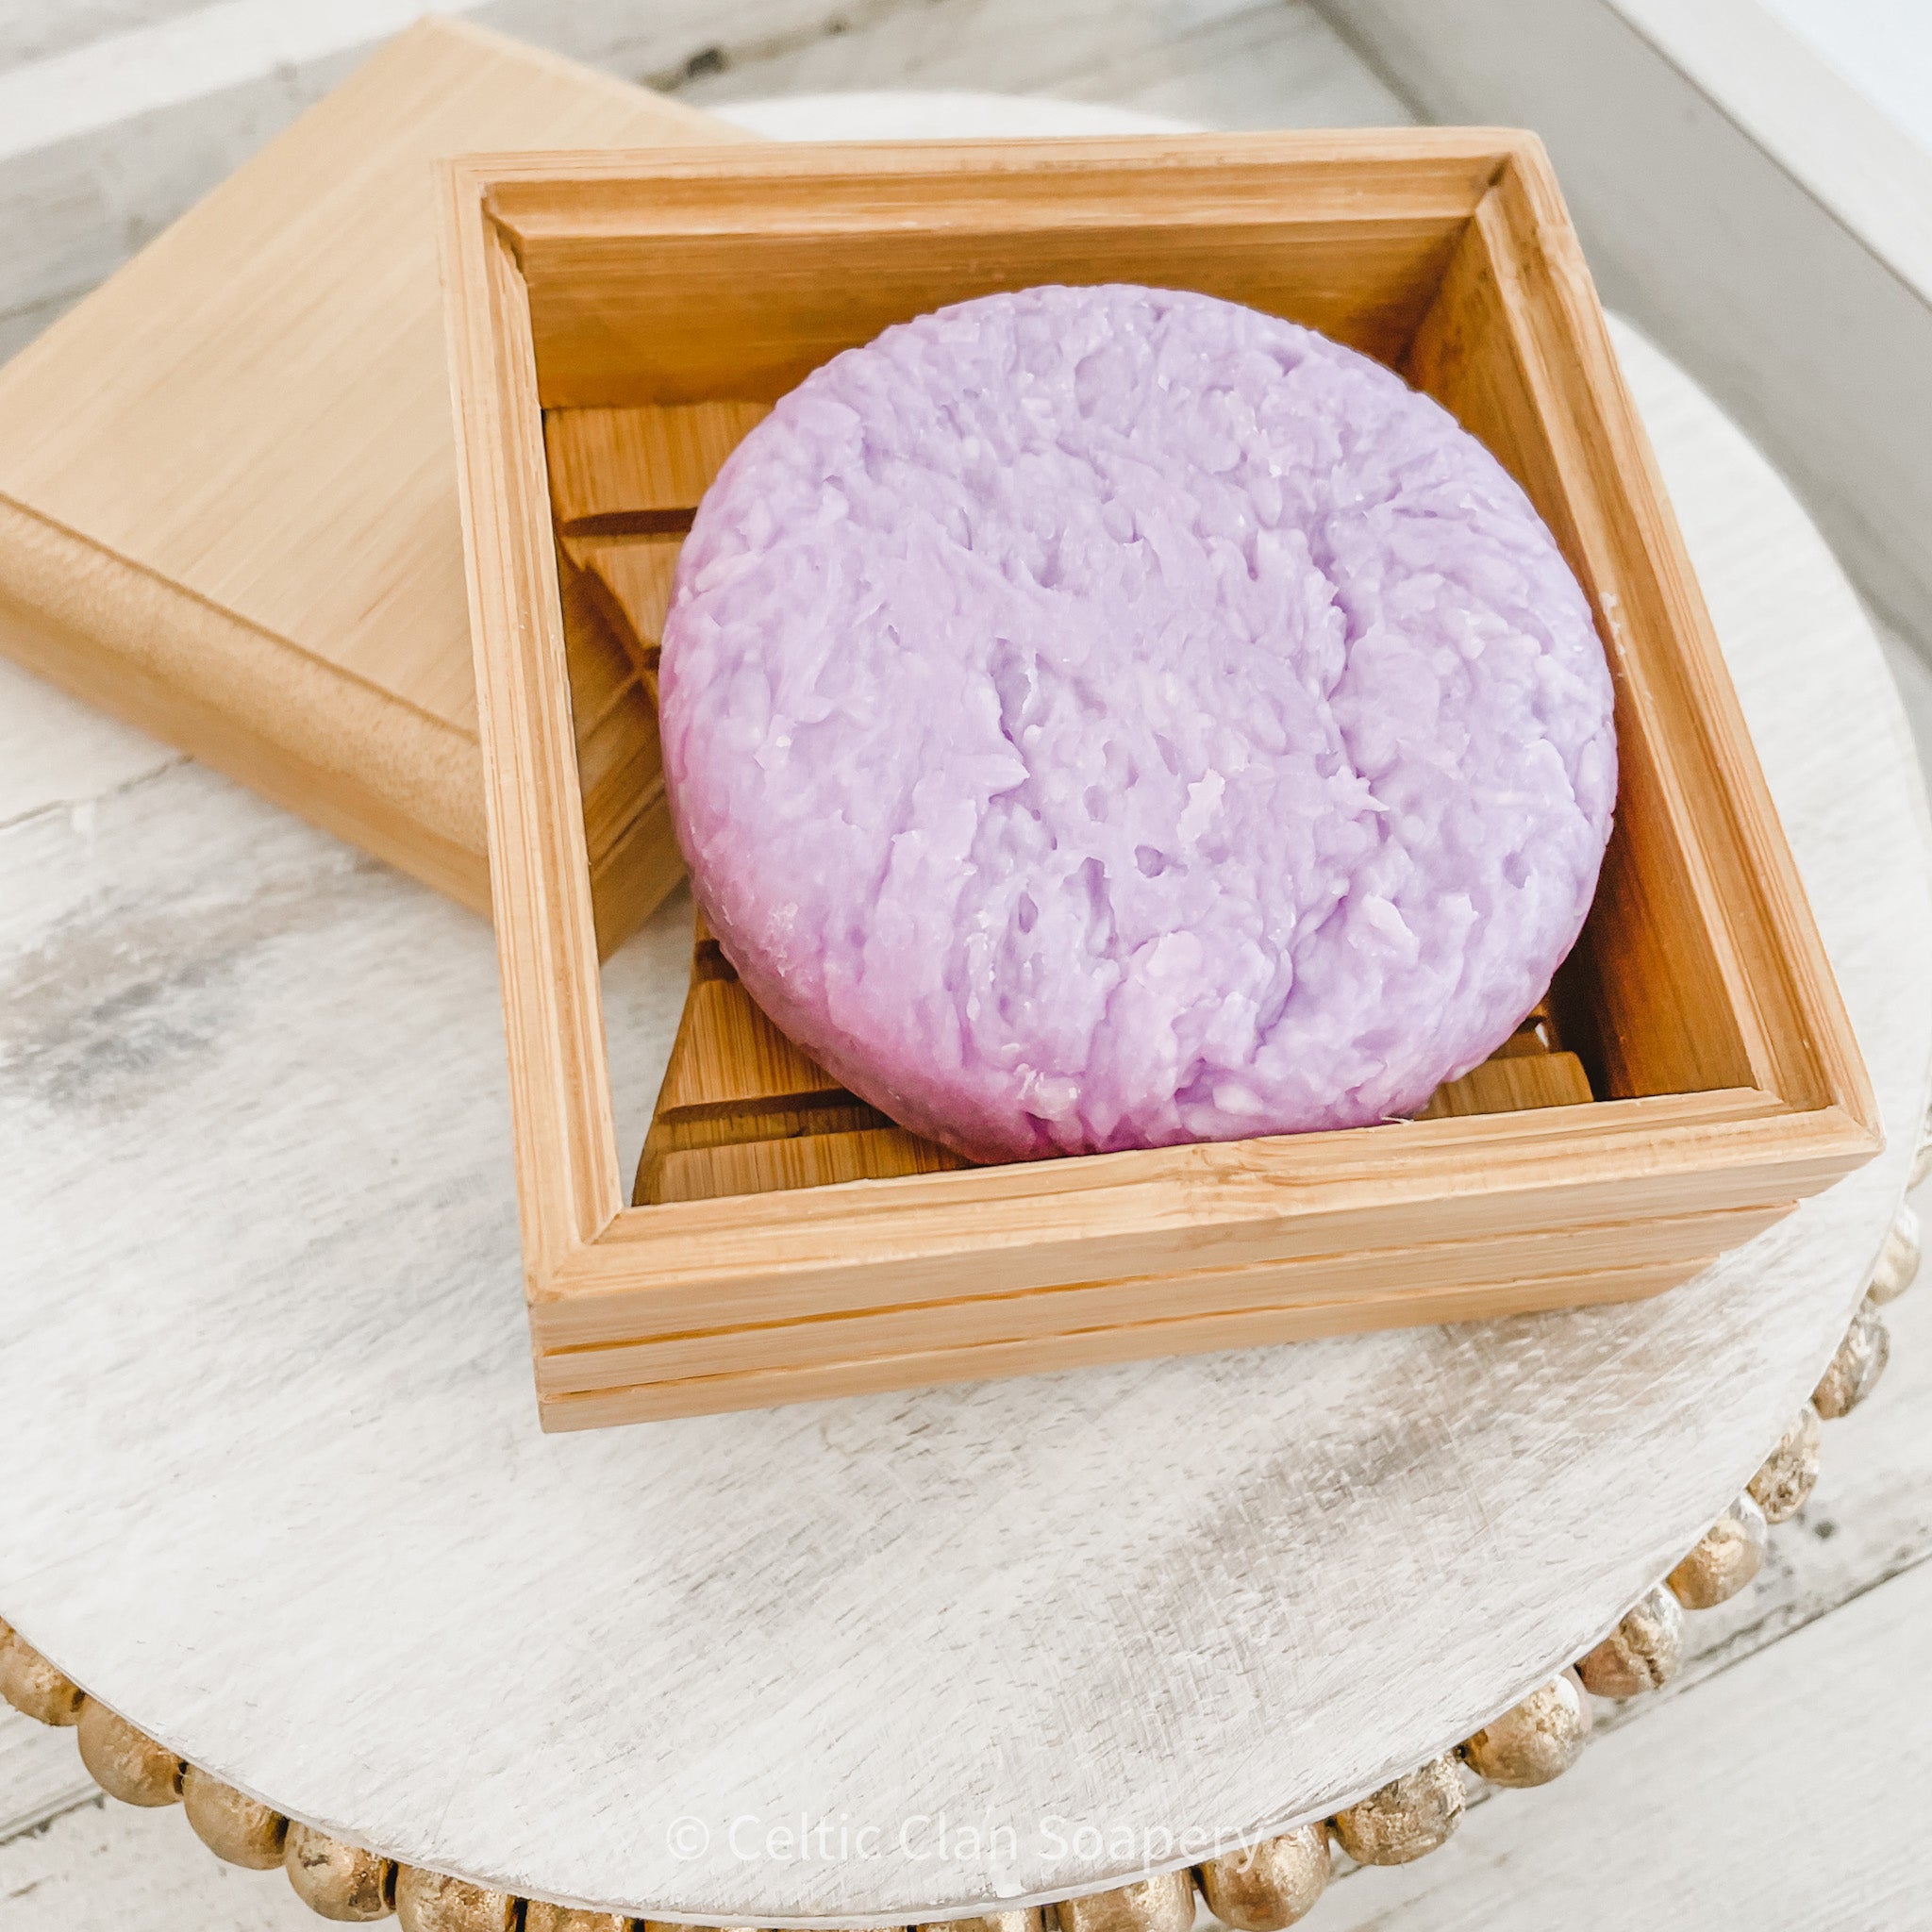 Celtic Clan Soapery sulfate free shampoo bar in bamboo box lavender essential oil